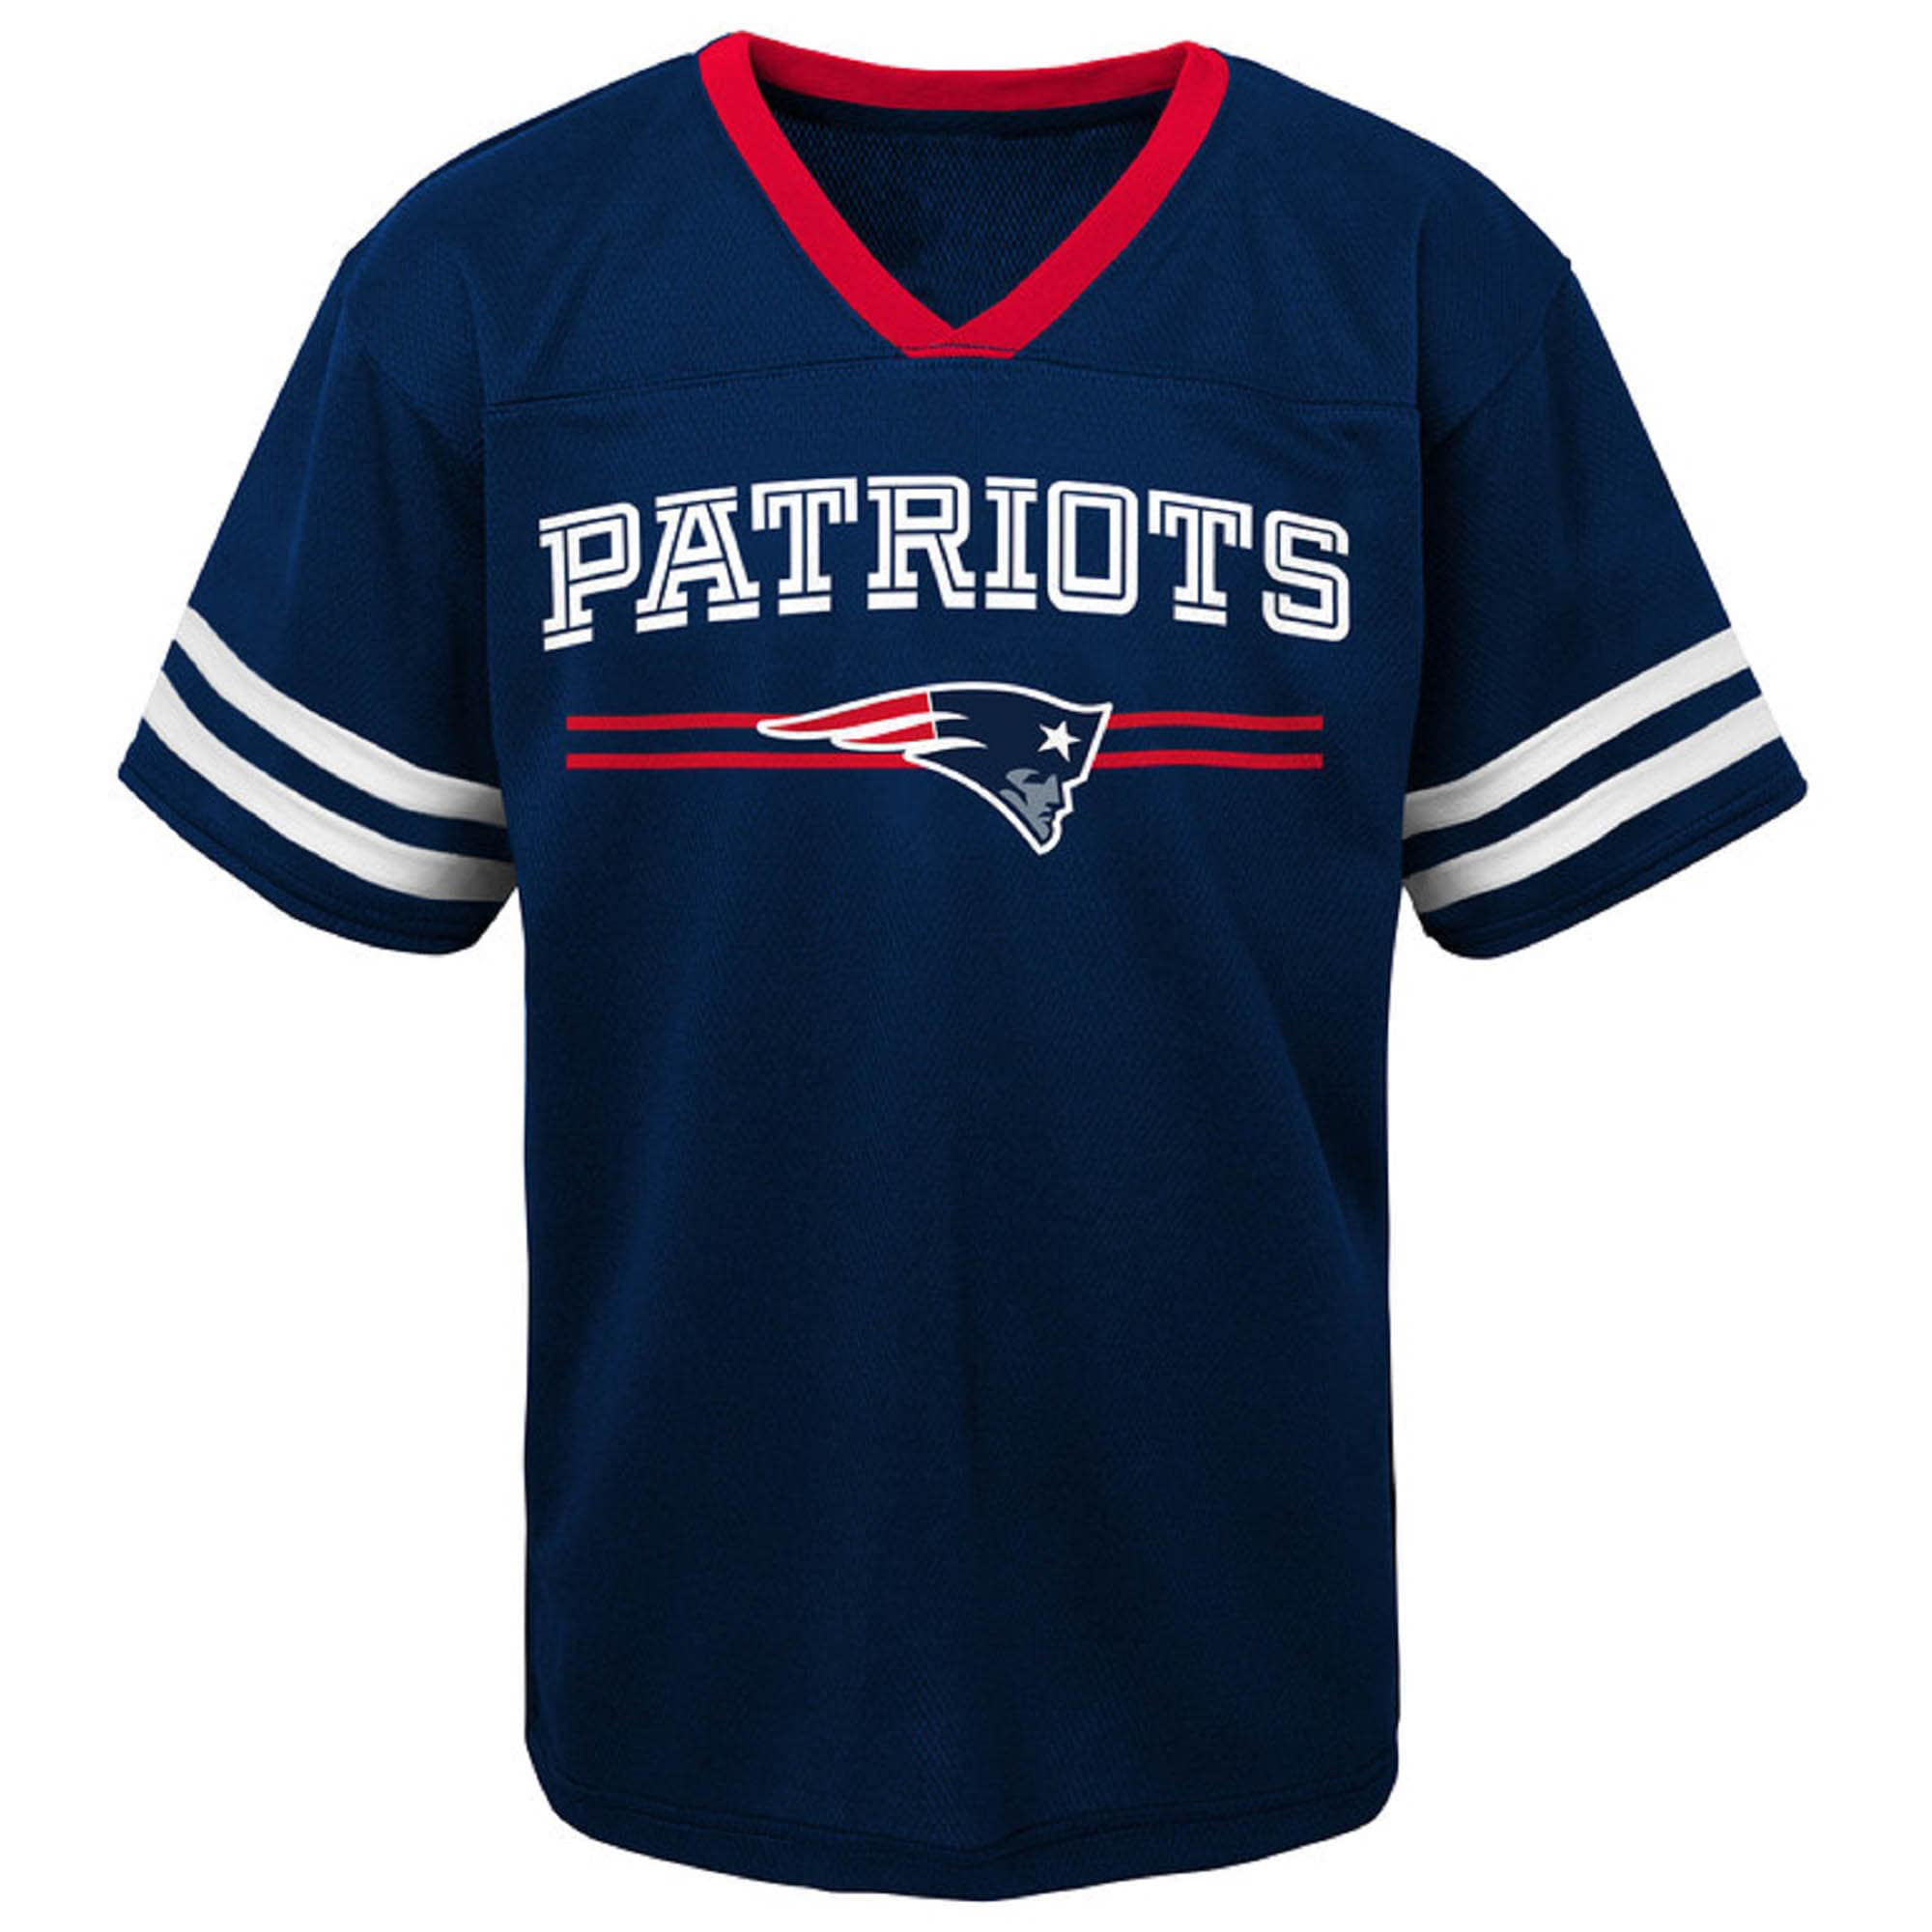 toddler new england patriots jersey